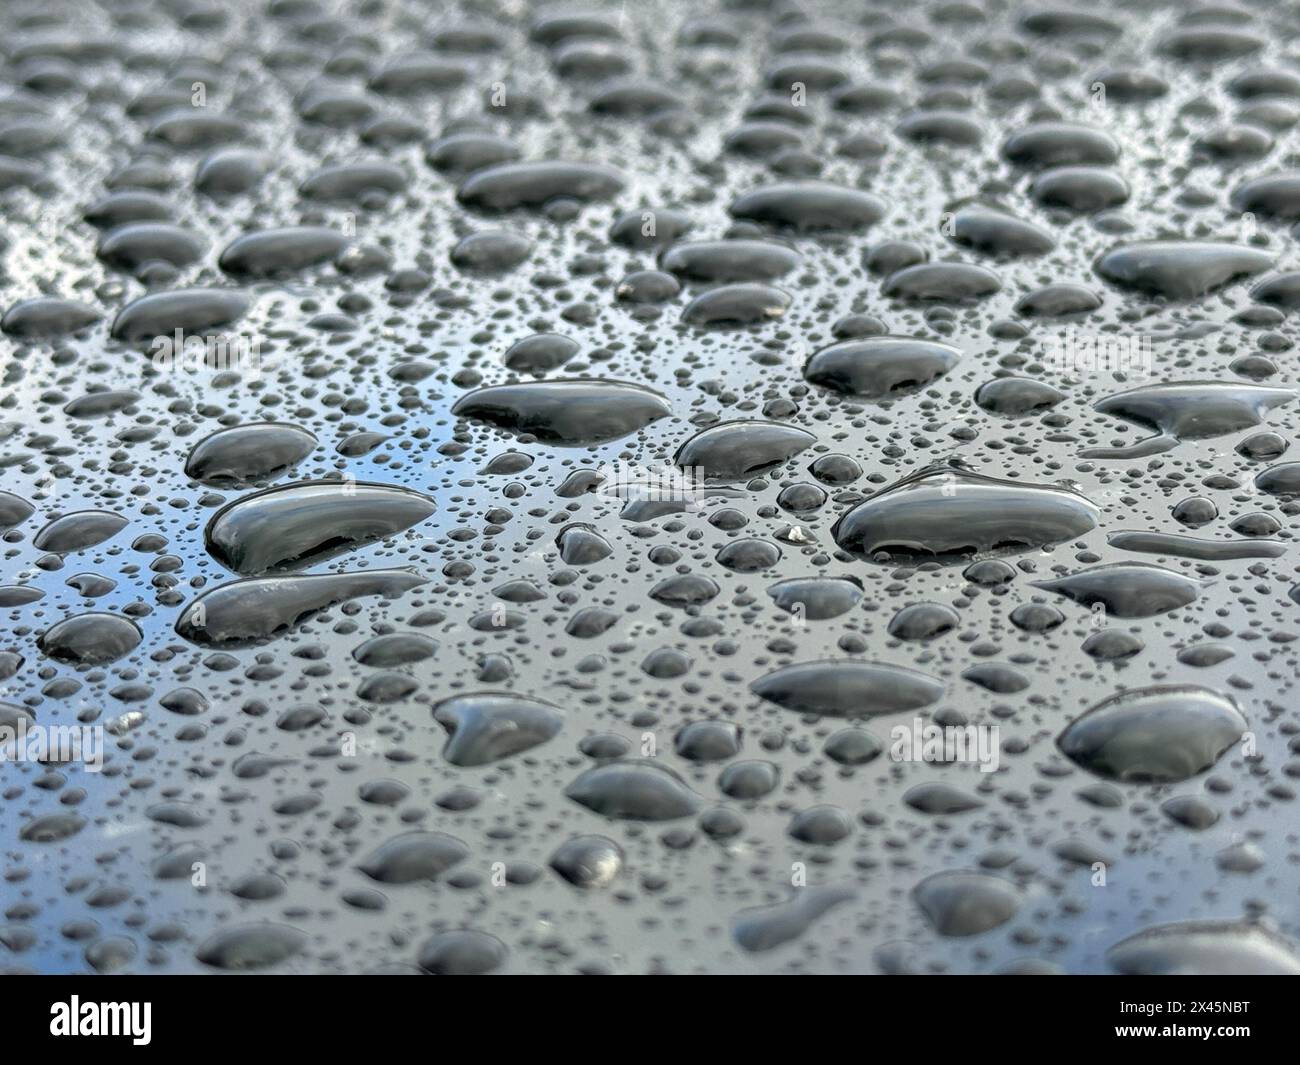 A wet surface with many small drops of water scattered across it. Scene is calm and serene, as the drops of water seem to be falling gently and evenly Stock Photo